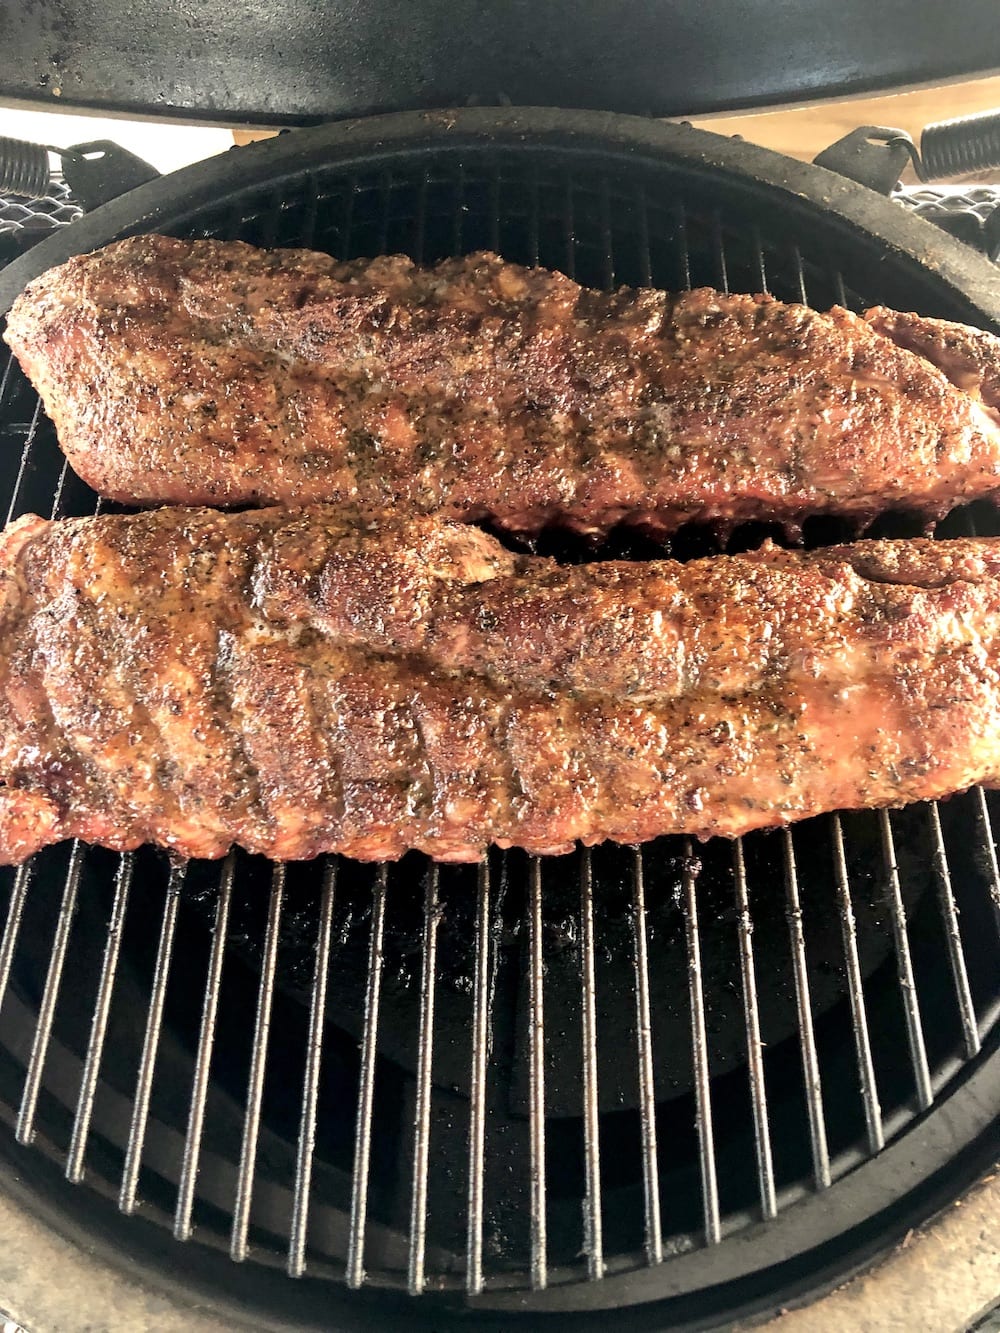 2 racks of dry rubbed ribs on a grill